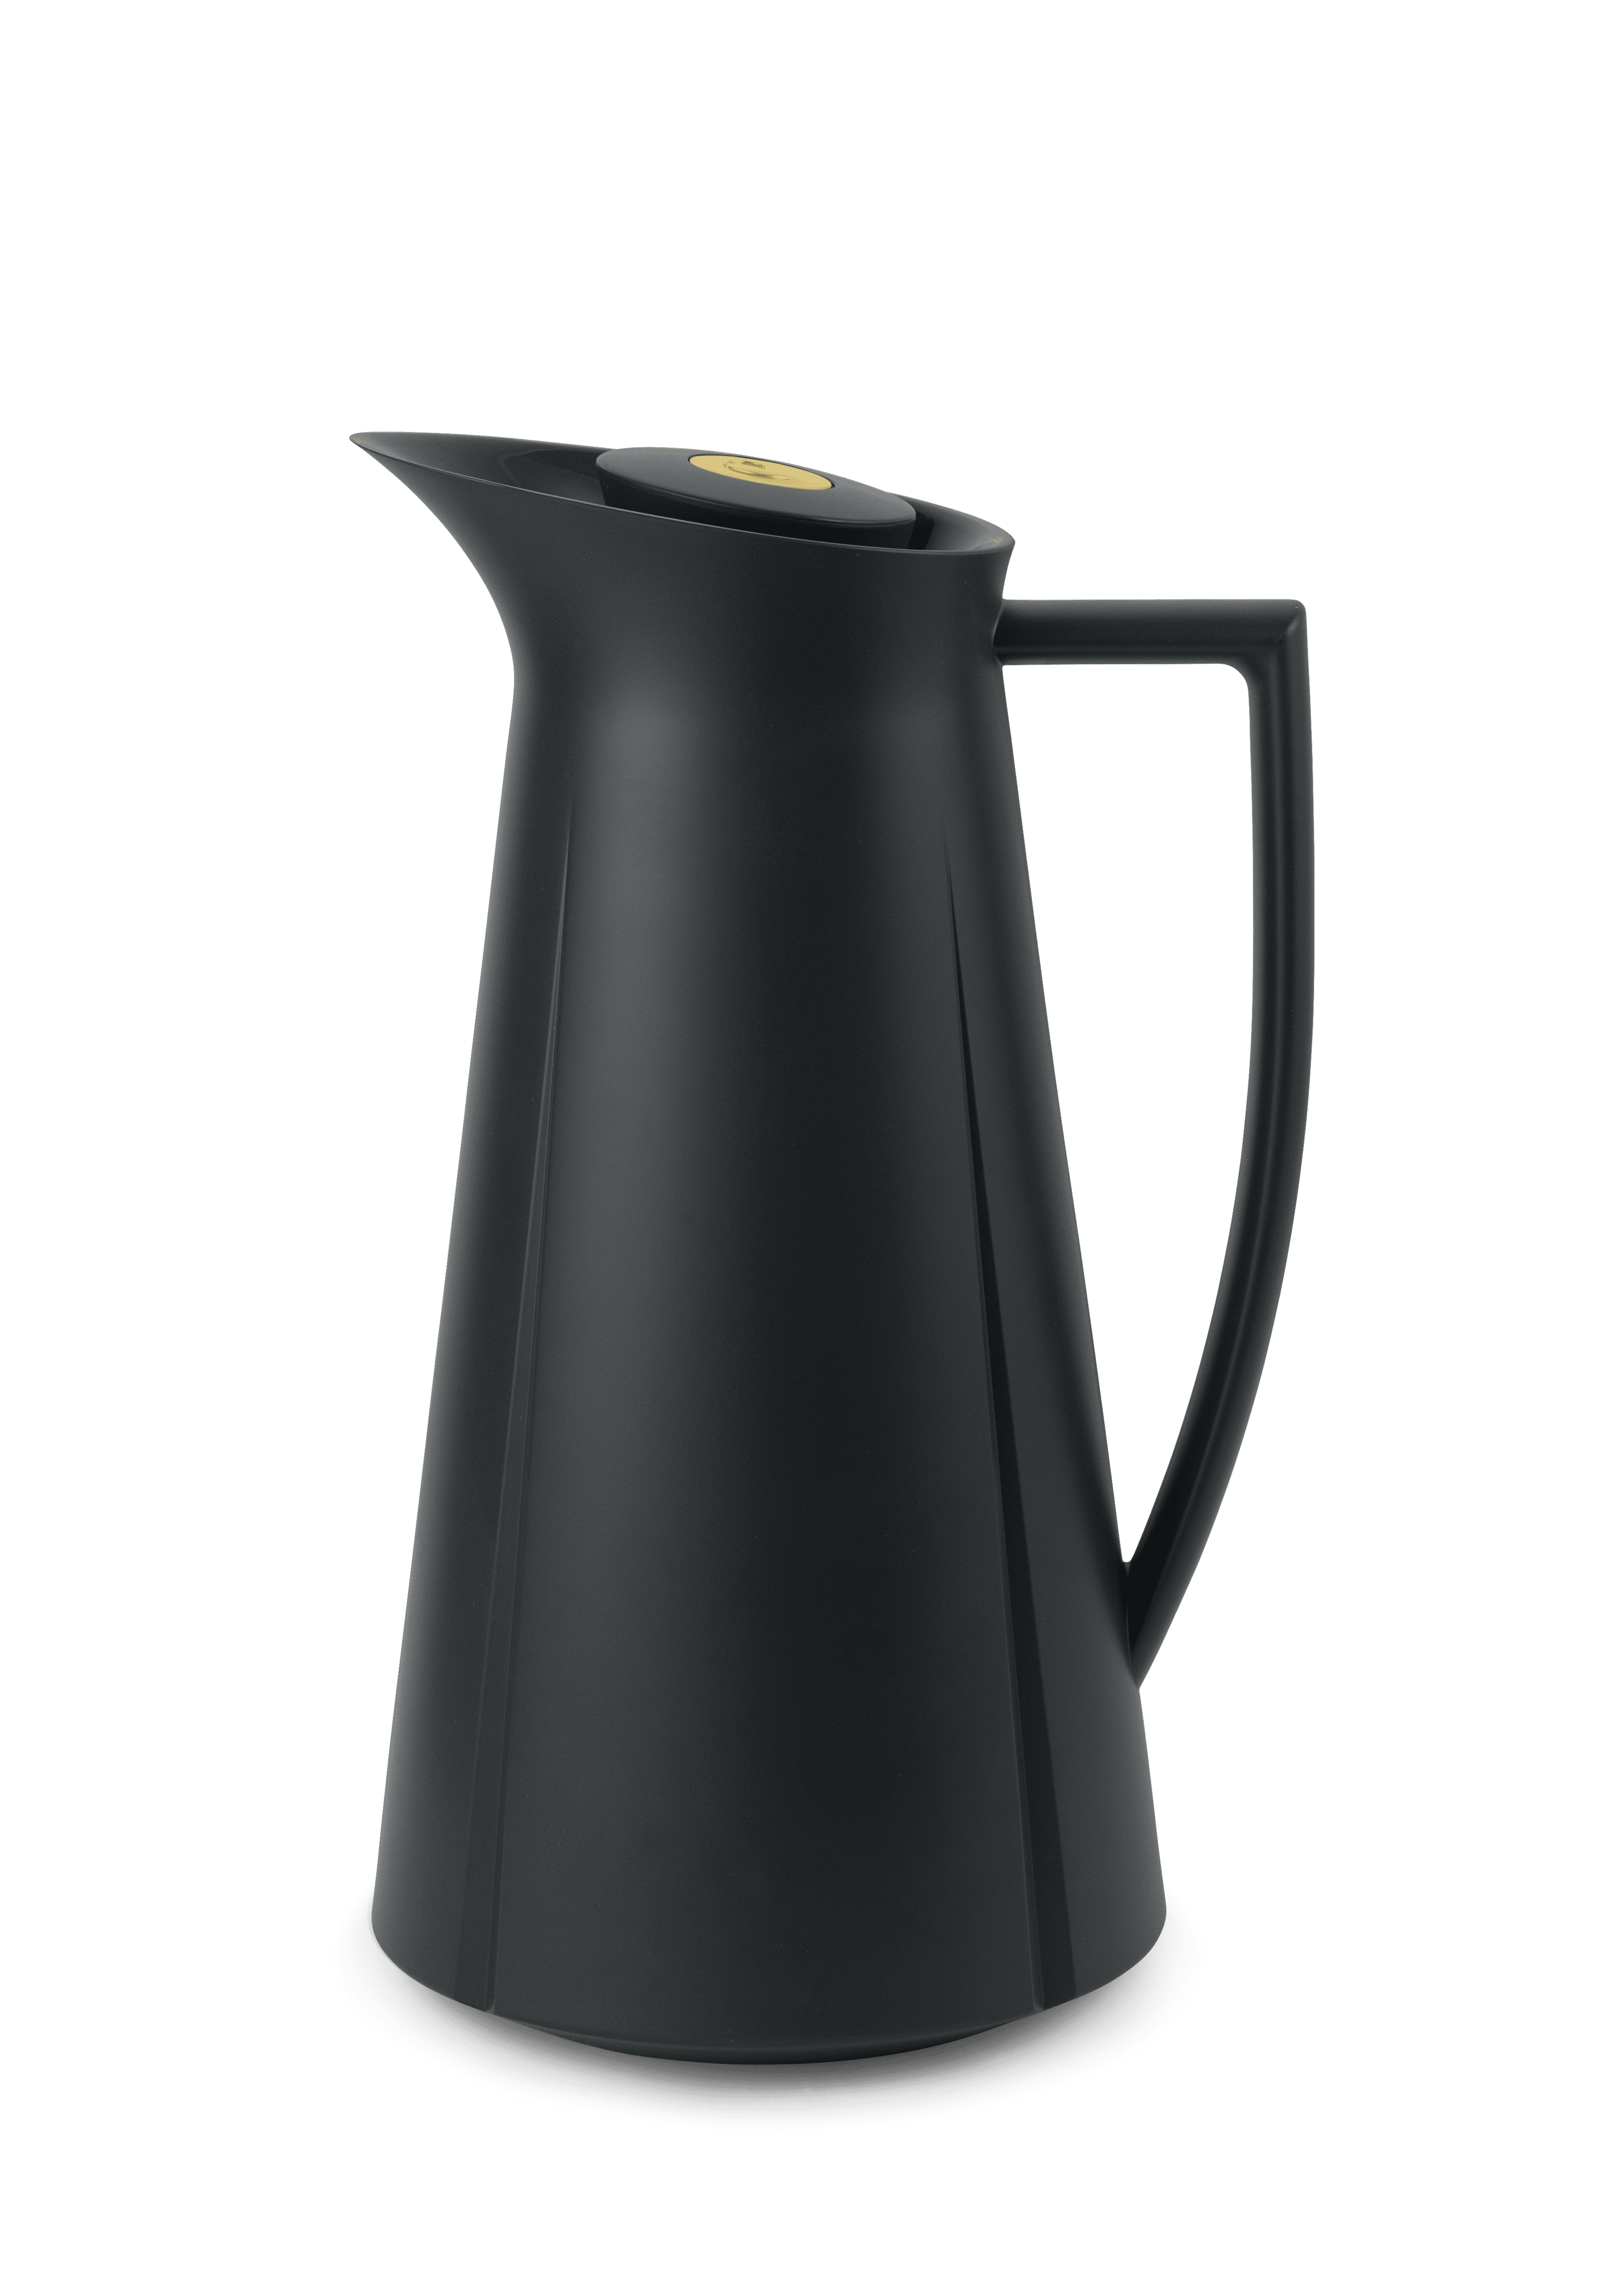 Rosendahl Gran Cru Thermos jug in gray with gold button